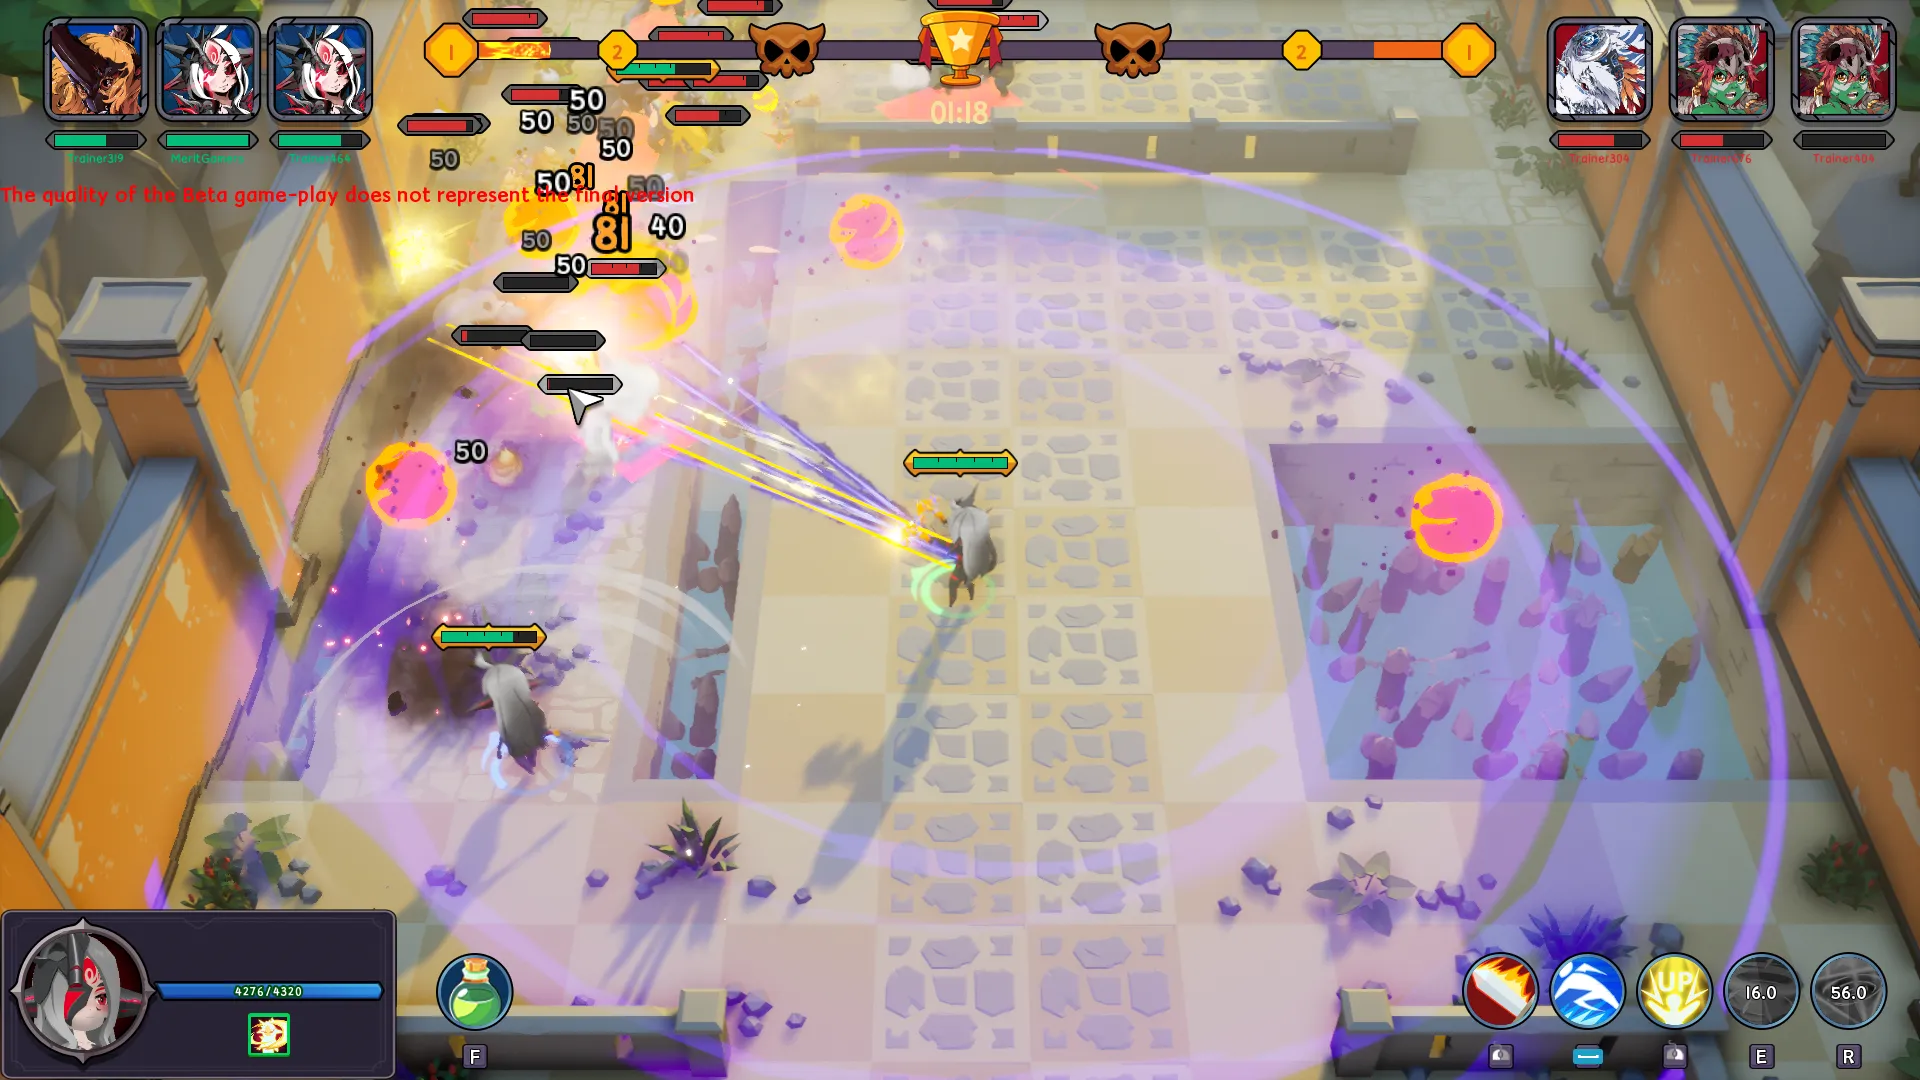 The Hero uses a skill in the match in Tearing Spaces. You can use your skill to defeat the enemies. Skill can be upgraded as you progress in the game